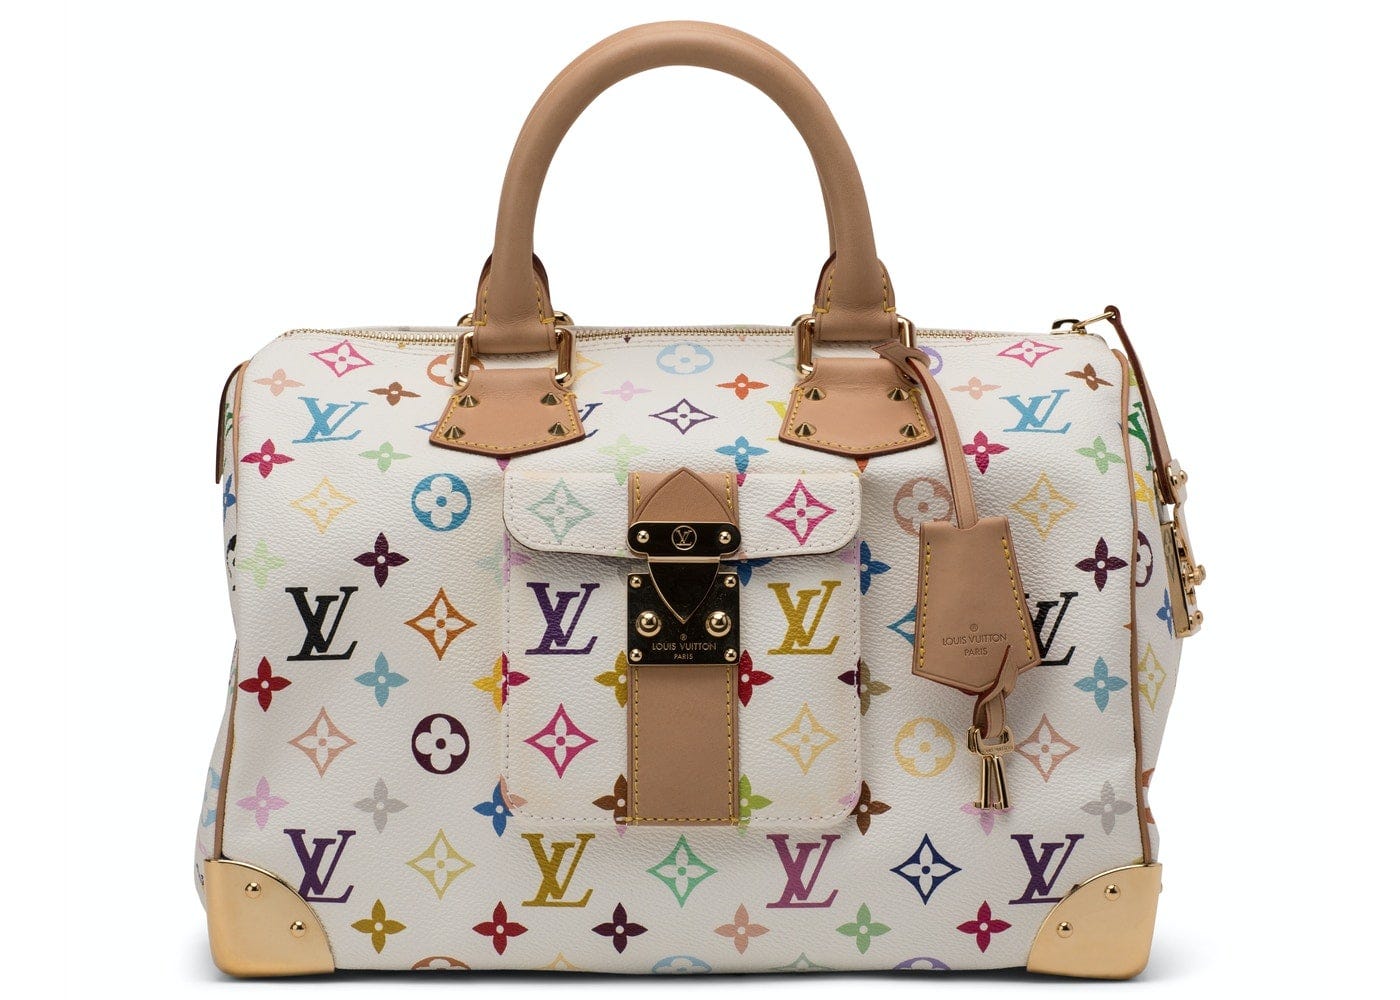 Louis Vuitton: The story behind the brand, by BRAND MINDS